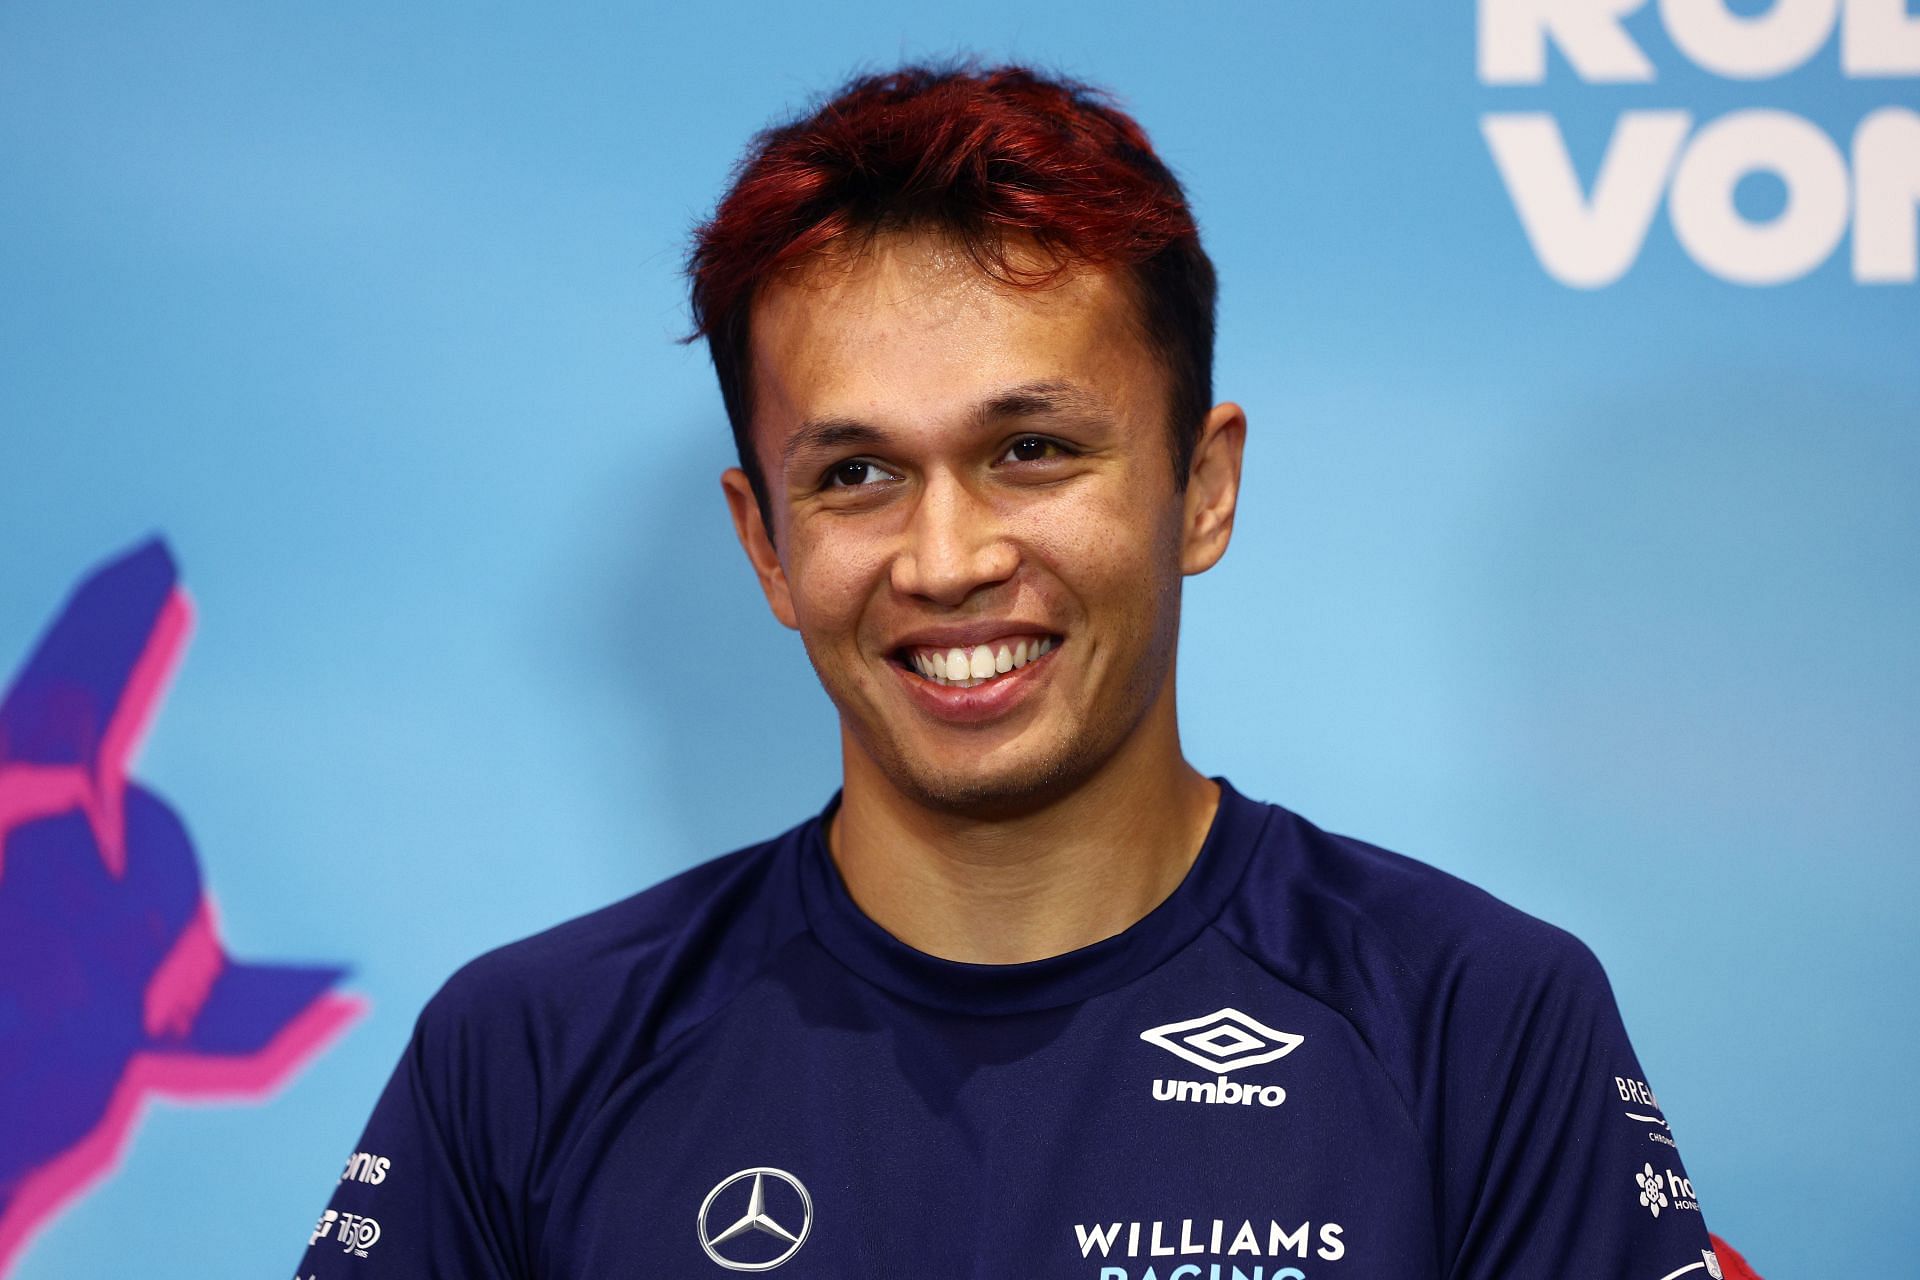 Alexander Albon during previews ahead of the F1 Grand Prix of Austria at Red Bull Ring on July 07, 2022 in Spielberg, Austria. (Photo by Clive Rose/Getty Images)